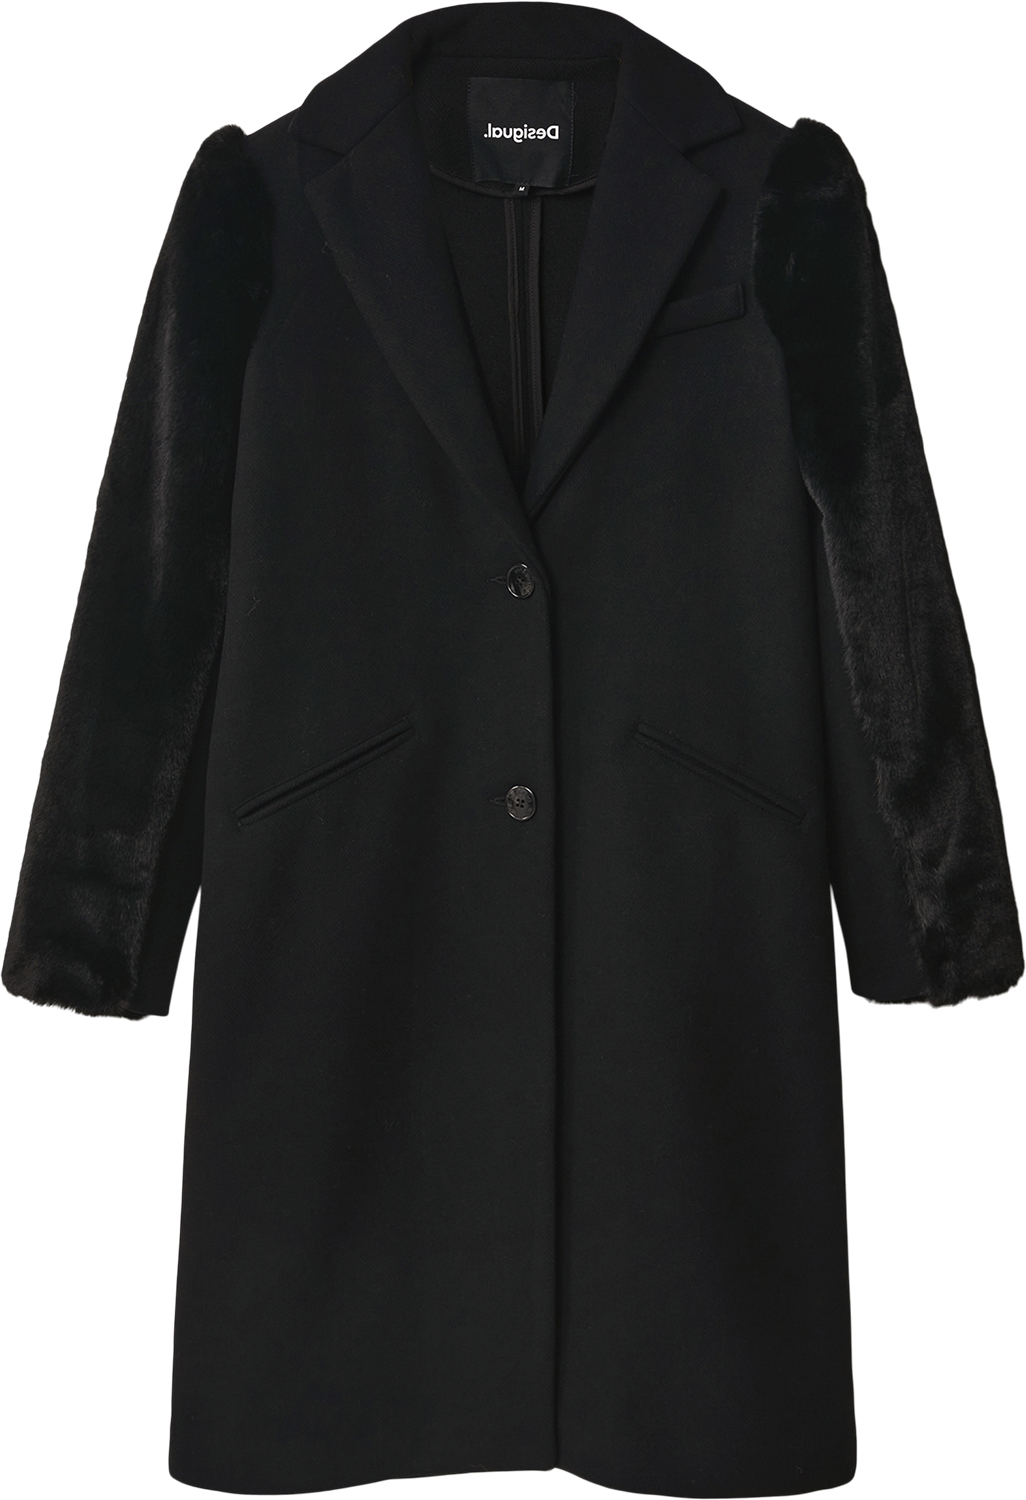 Straight Long Black Coat With Syntheticfur Sleeves